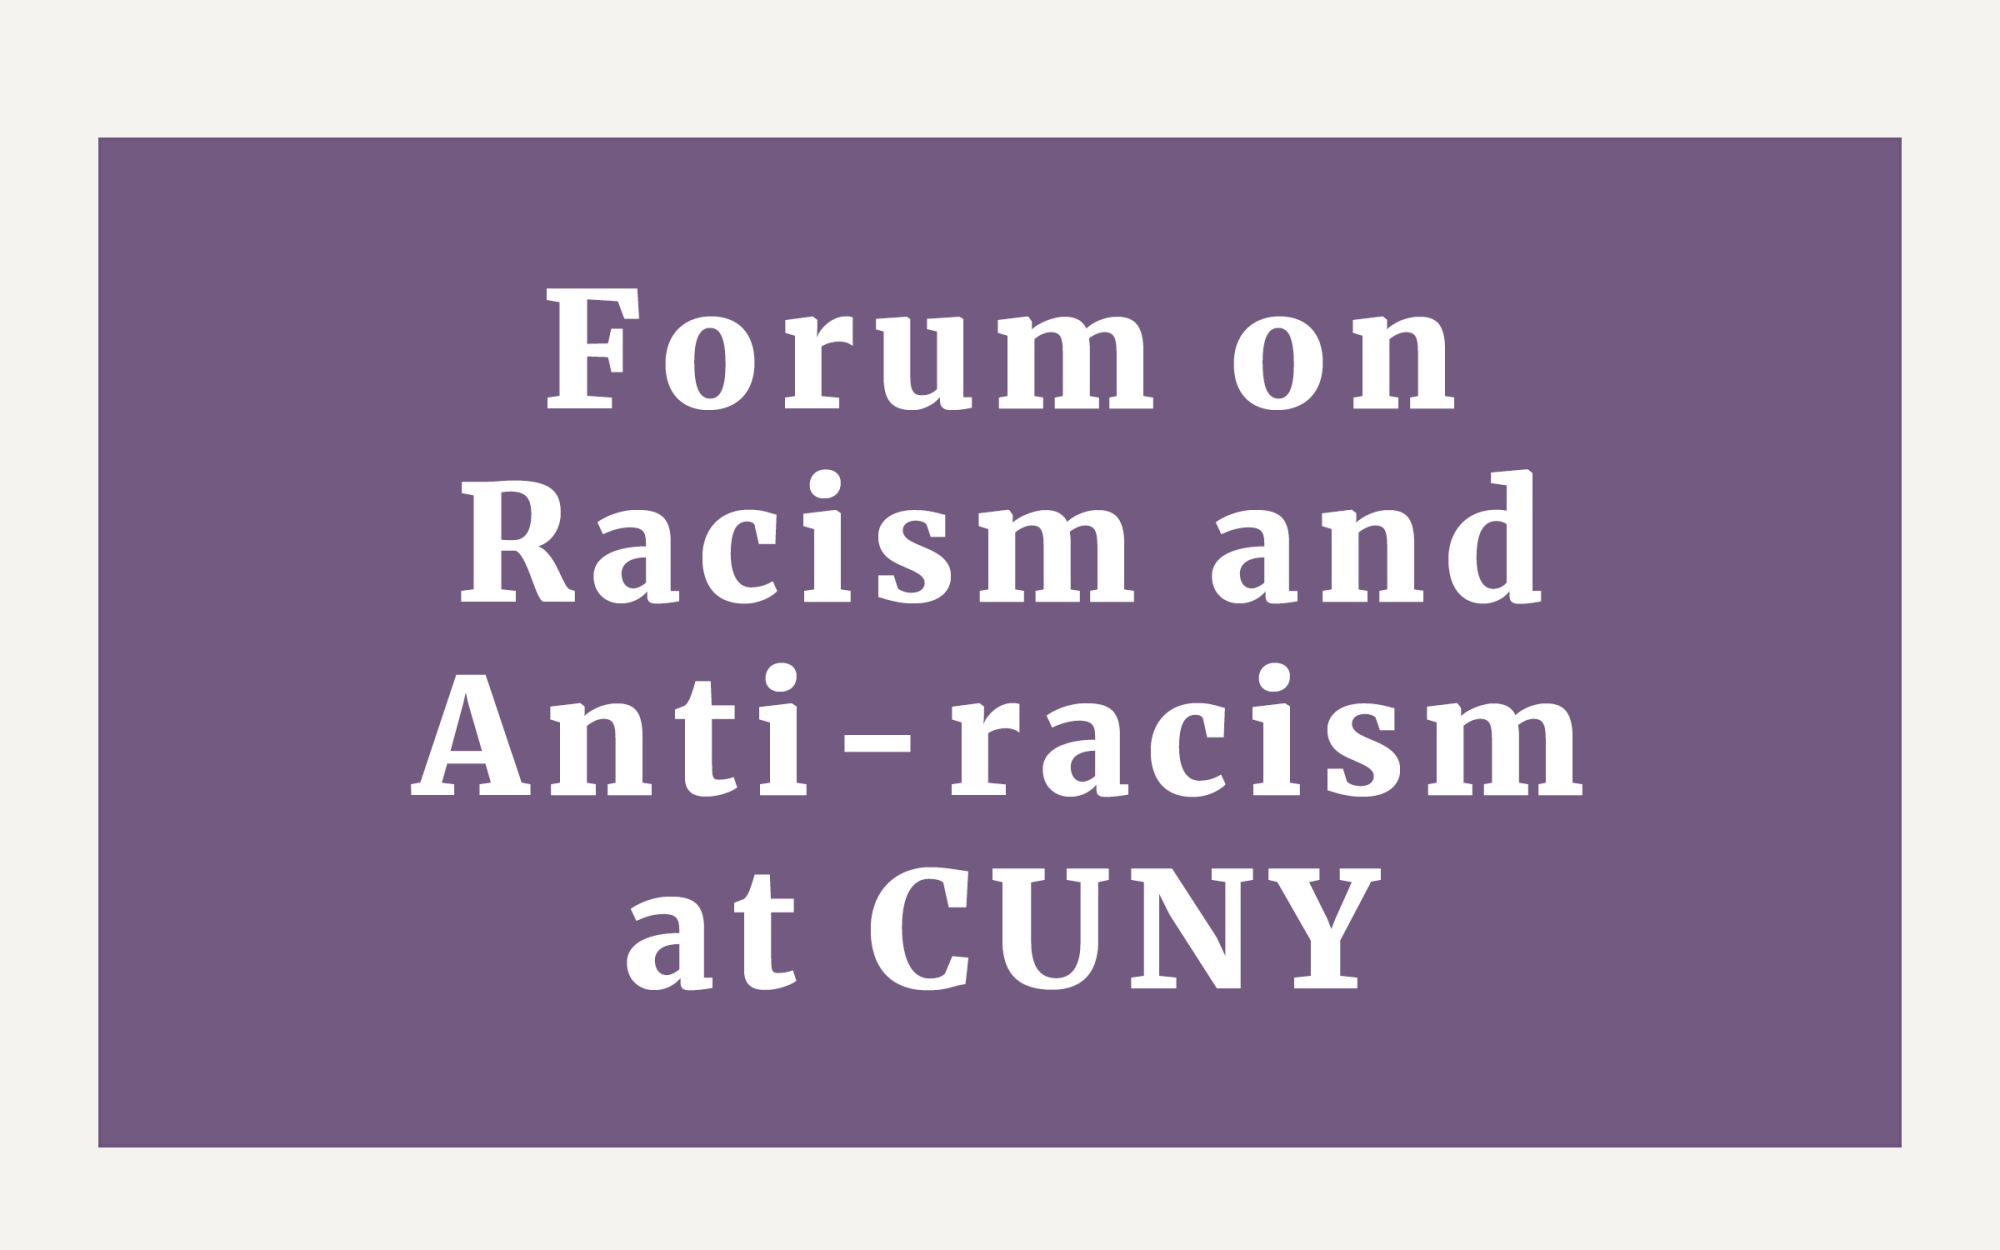 Forum on Racism and Anti-racism at CUNY